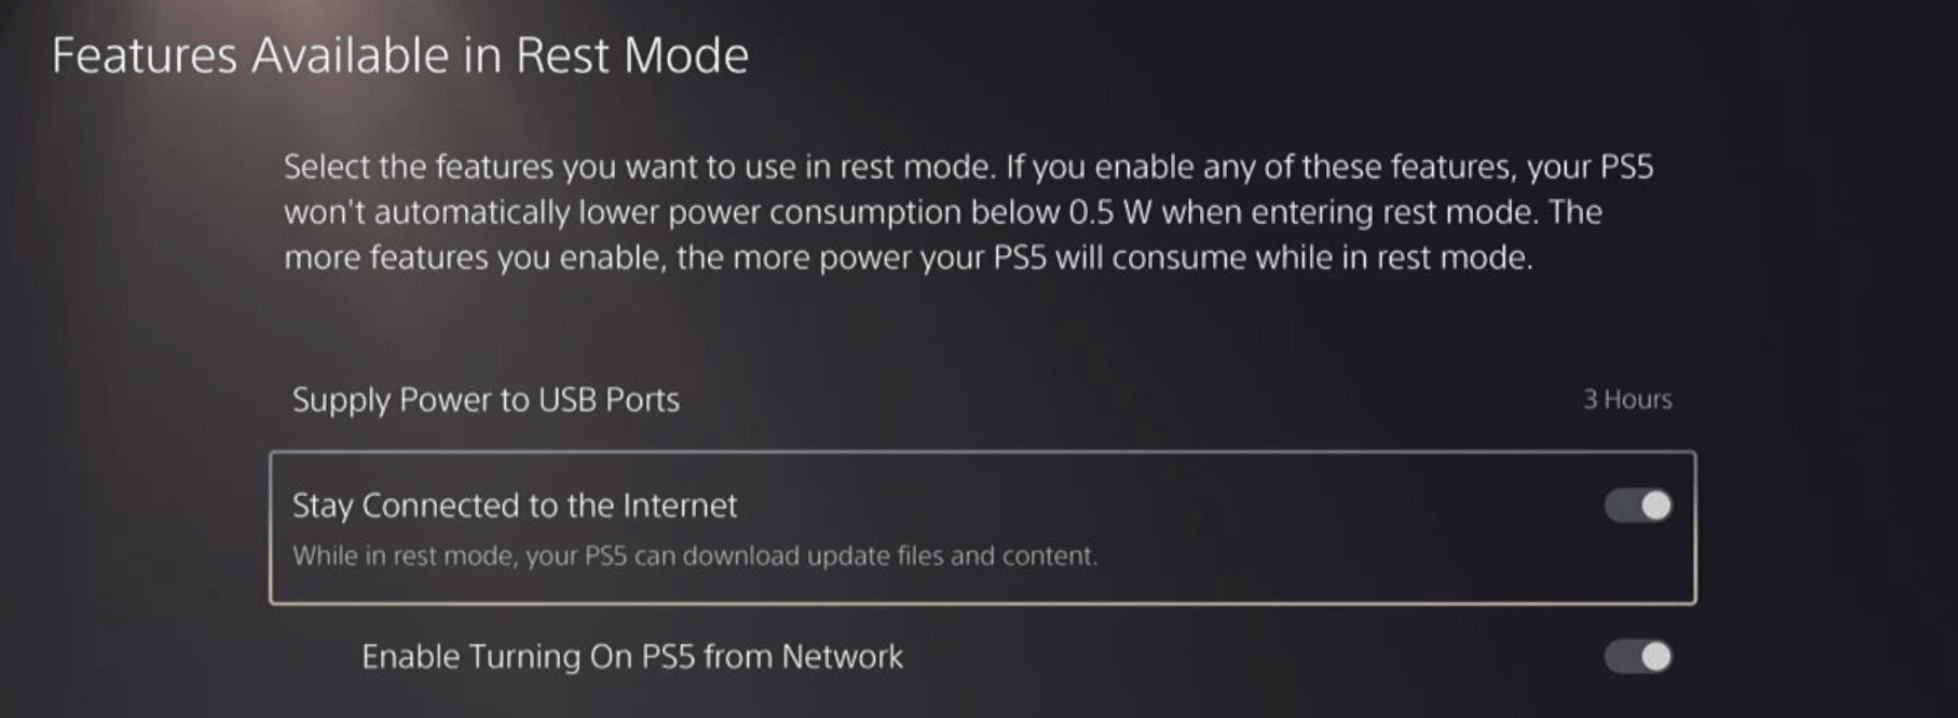 Stay Connected to the Internet is toggled in PS5 rest mode settings menu to enable automatic updates of Born of Bread